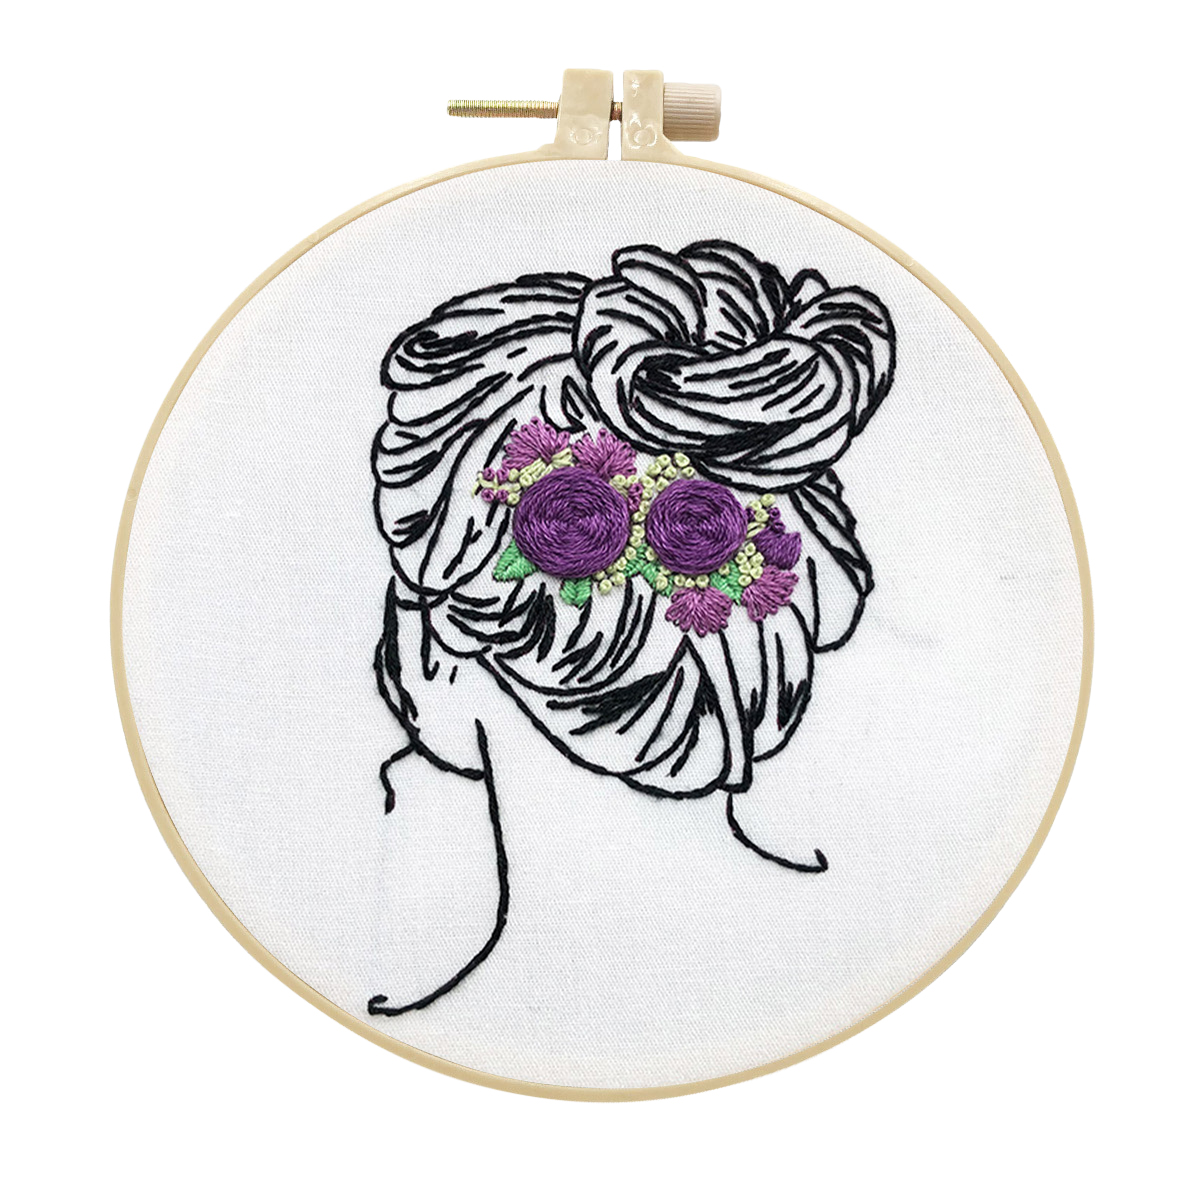 Craft Handmade Embroidery kit for Adult - Girl with Purple Rose Pattern